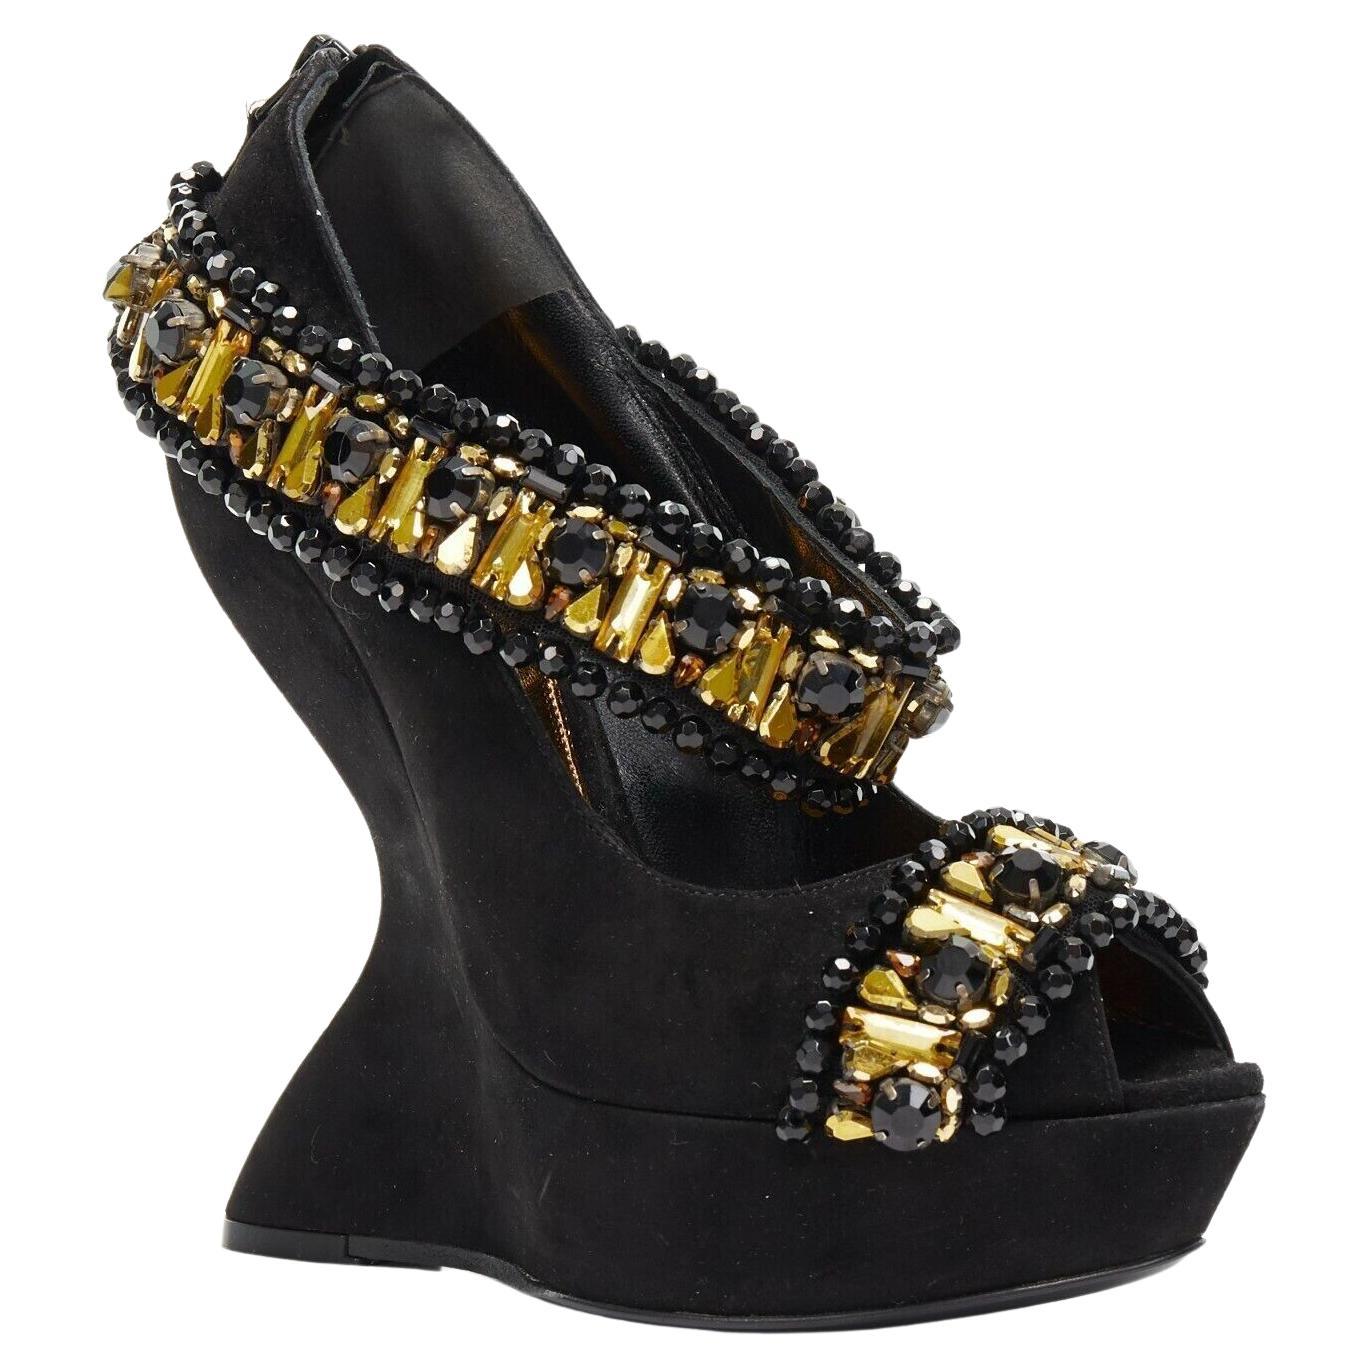 New Alexander McQueen Black Champagne Embellished Wedge Shoes Italian 38 For Sale